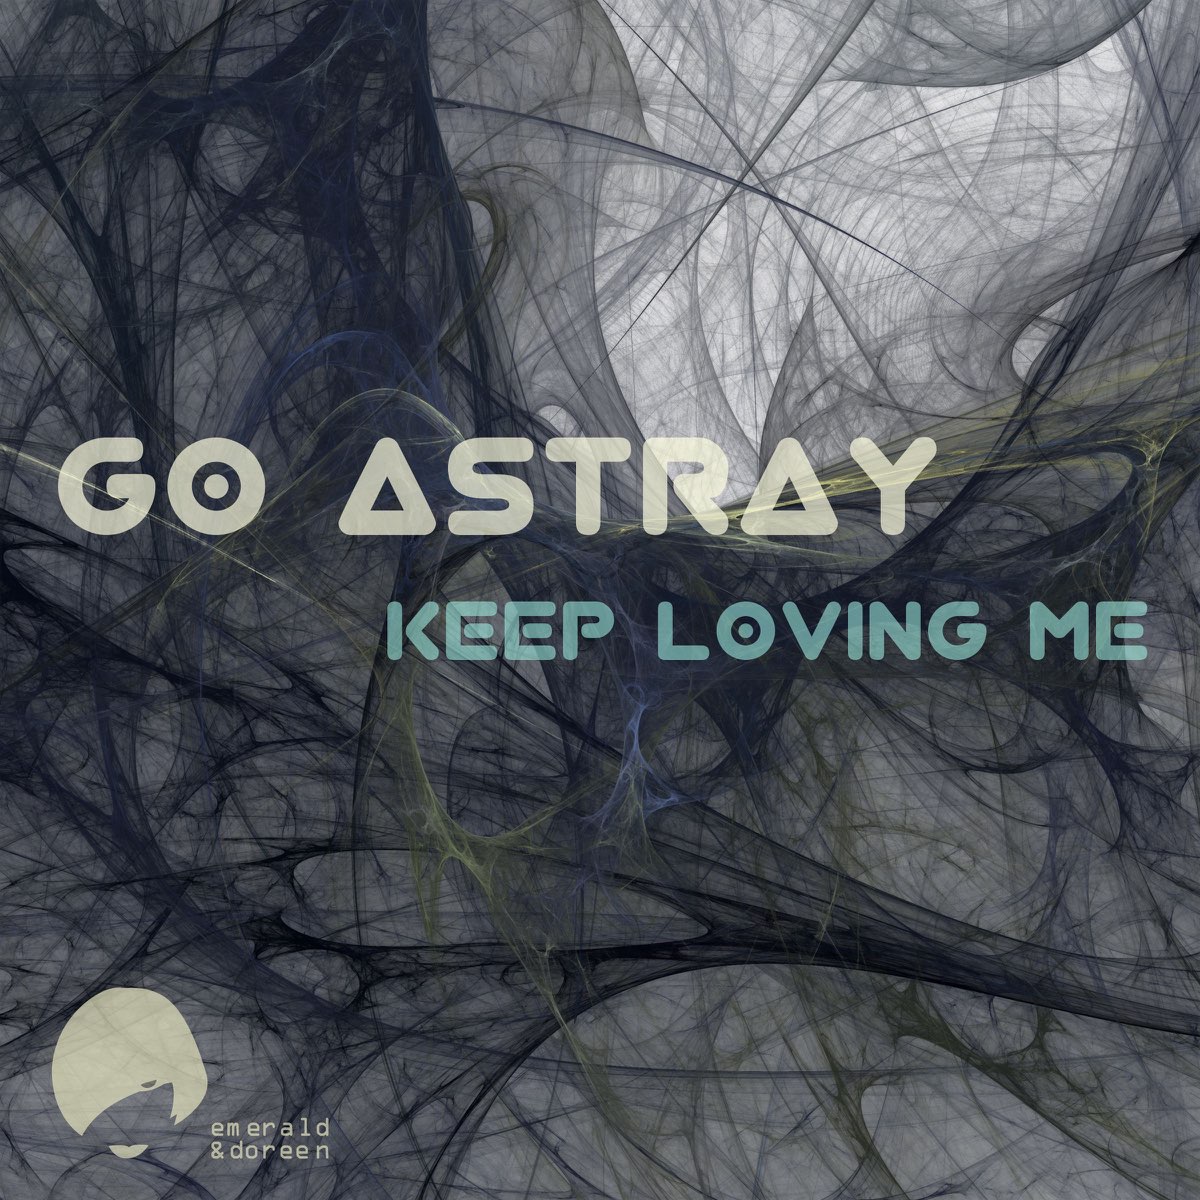 Gone Astray. Keep loving. Keep your love